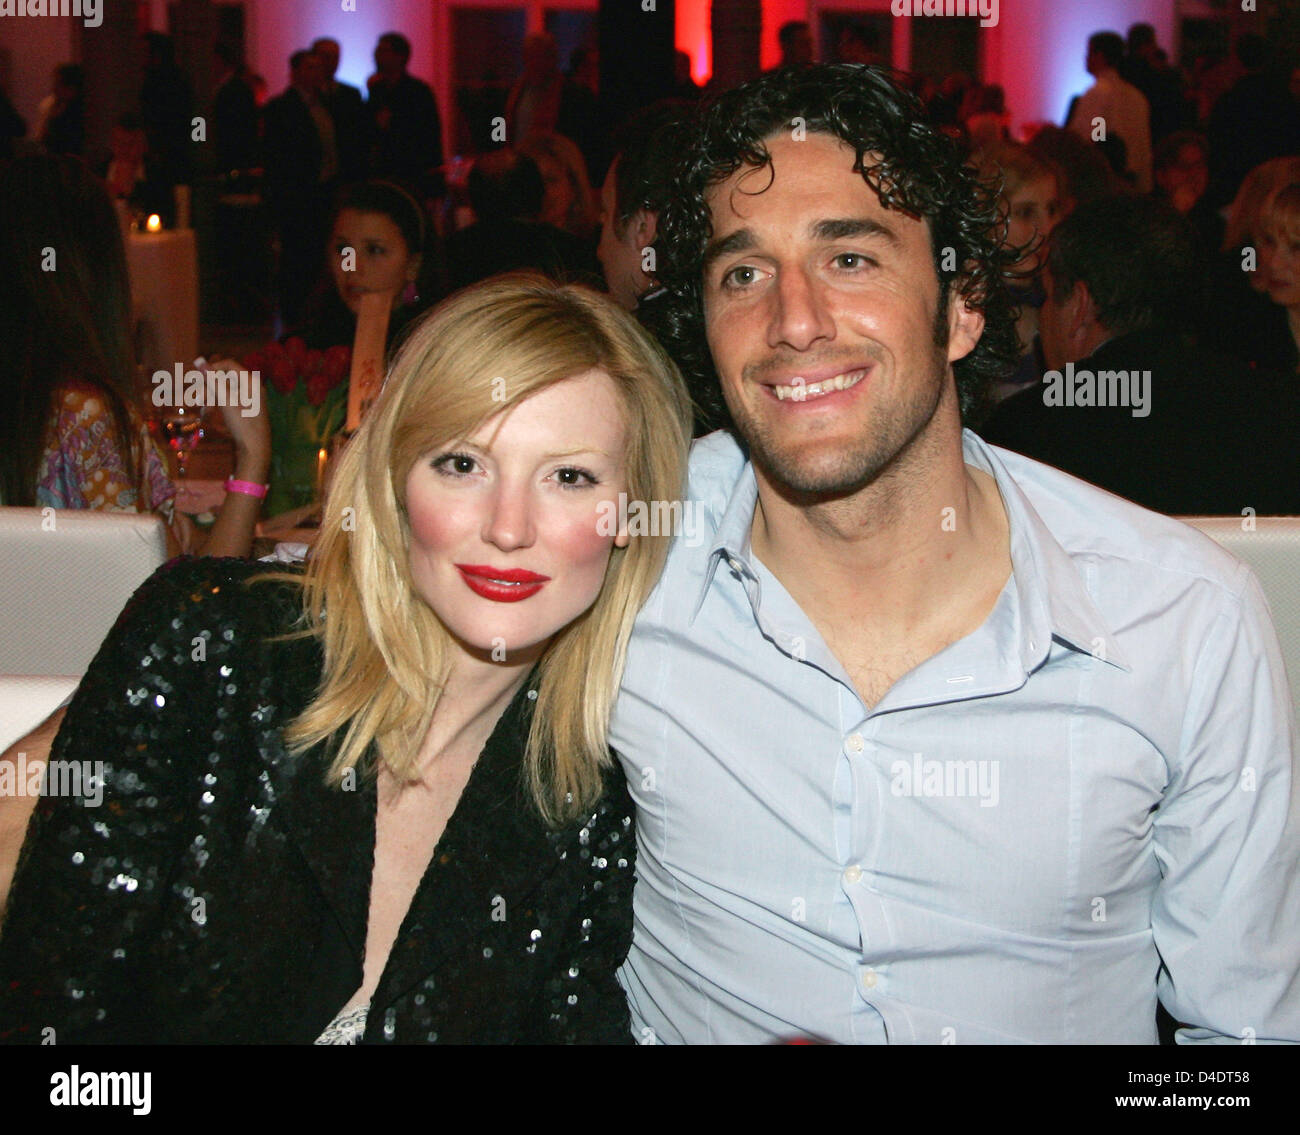 Luca Toni of Bayern Munic poses with his girlfriend Marta Cecchetto and the DFB-Trophy during the Bayern Munich champions party after the DFB Cup Final match between Borussia Dortmund and FC Bayern Munich at the Deutsche Telekom Represantive House Berlin, Germany, in the early morning of 20 April 2008. Photo: Alexander Hassenstein Stock Photo